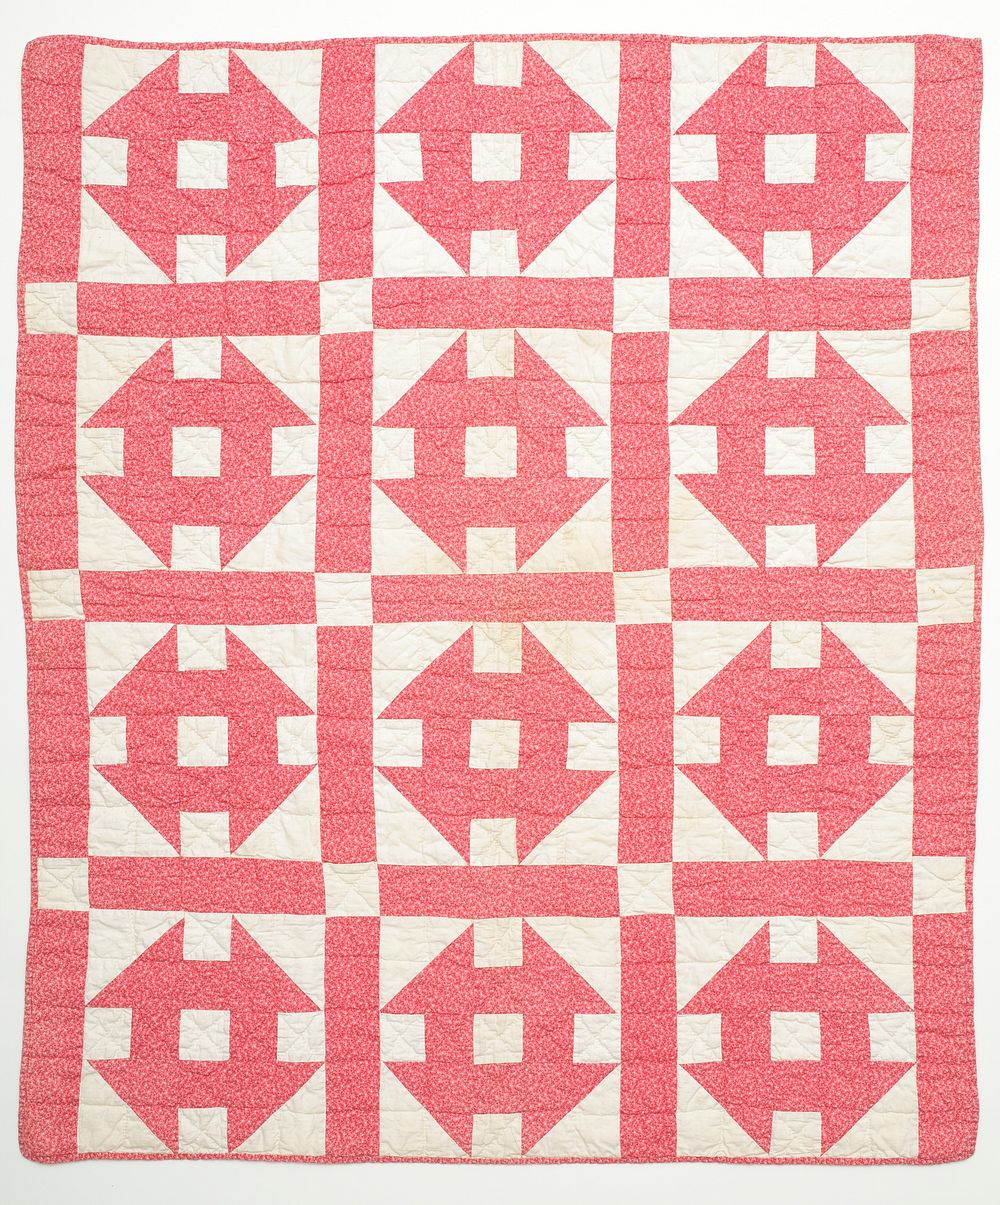 Child’s Quilt, 'Hole in the Barn Door' or 'Monkey Wrench'